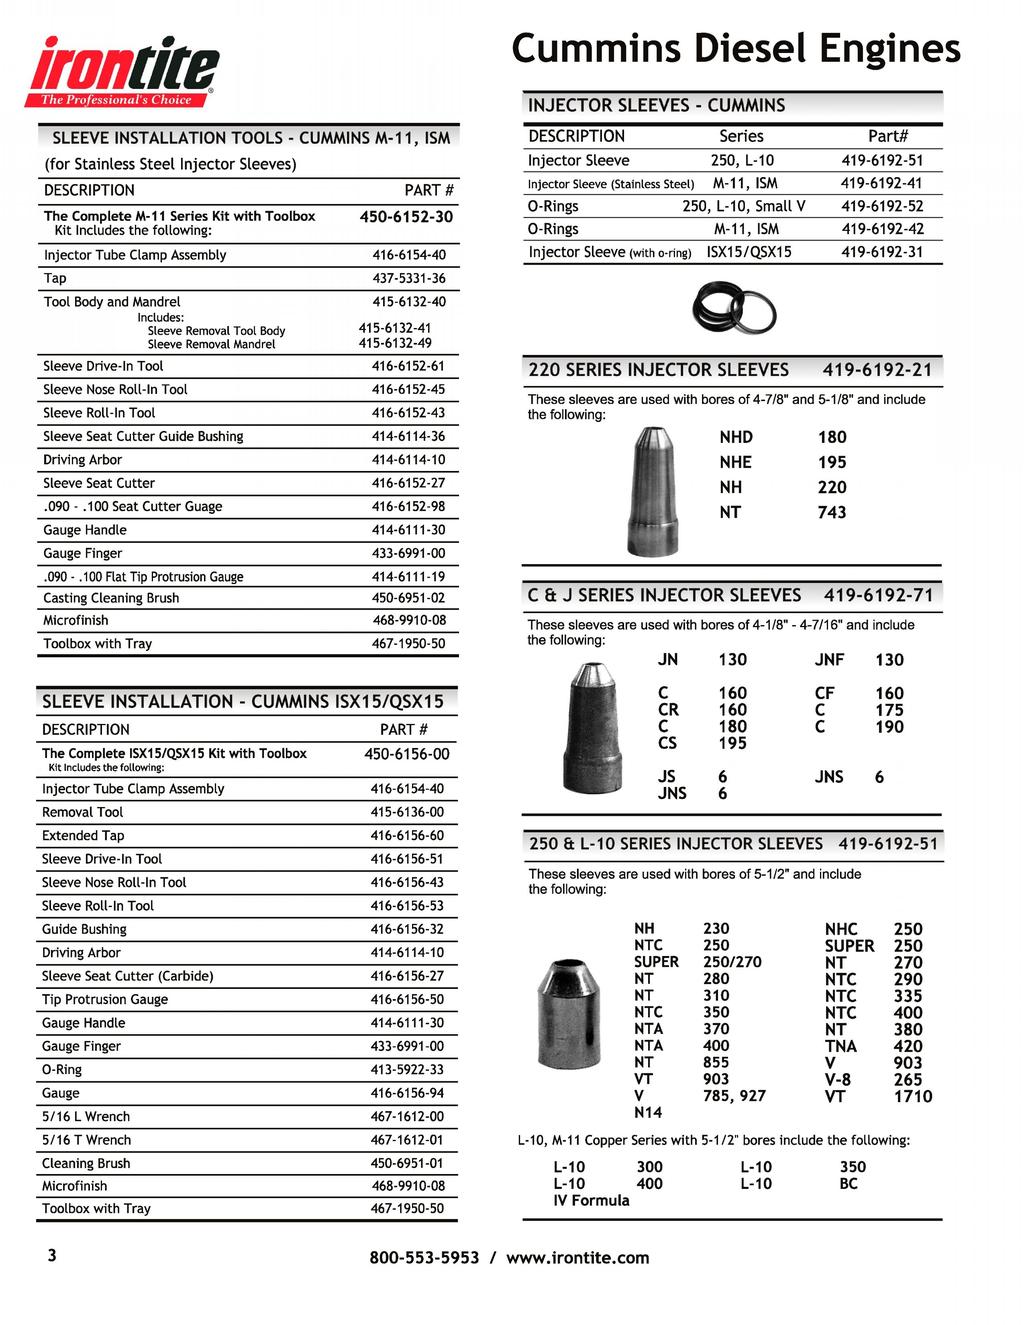 Cummins Diesel Engines INJECTOR SLEEES - C U M M I N S SLEEE INSTALLATION TOOLS - CUMMINS M-11, ISM (for Stainless Steel Injector Sleeves) PART # DESCRIPTION The Complete M-11 Series Kit with Toolbox